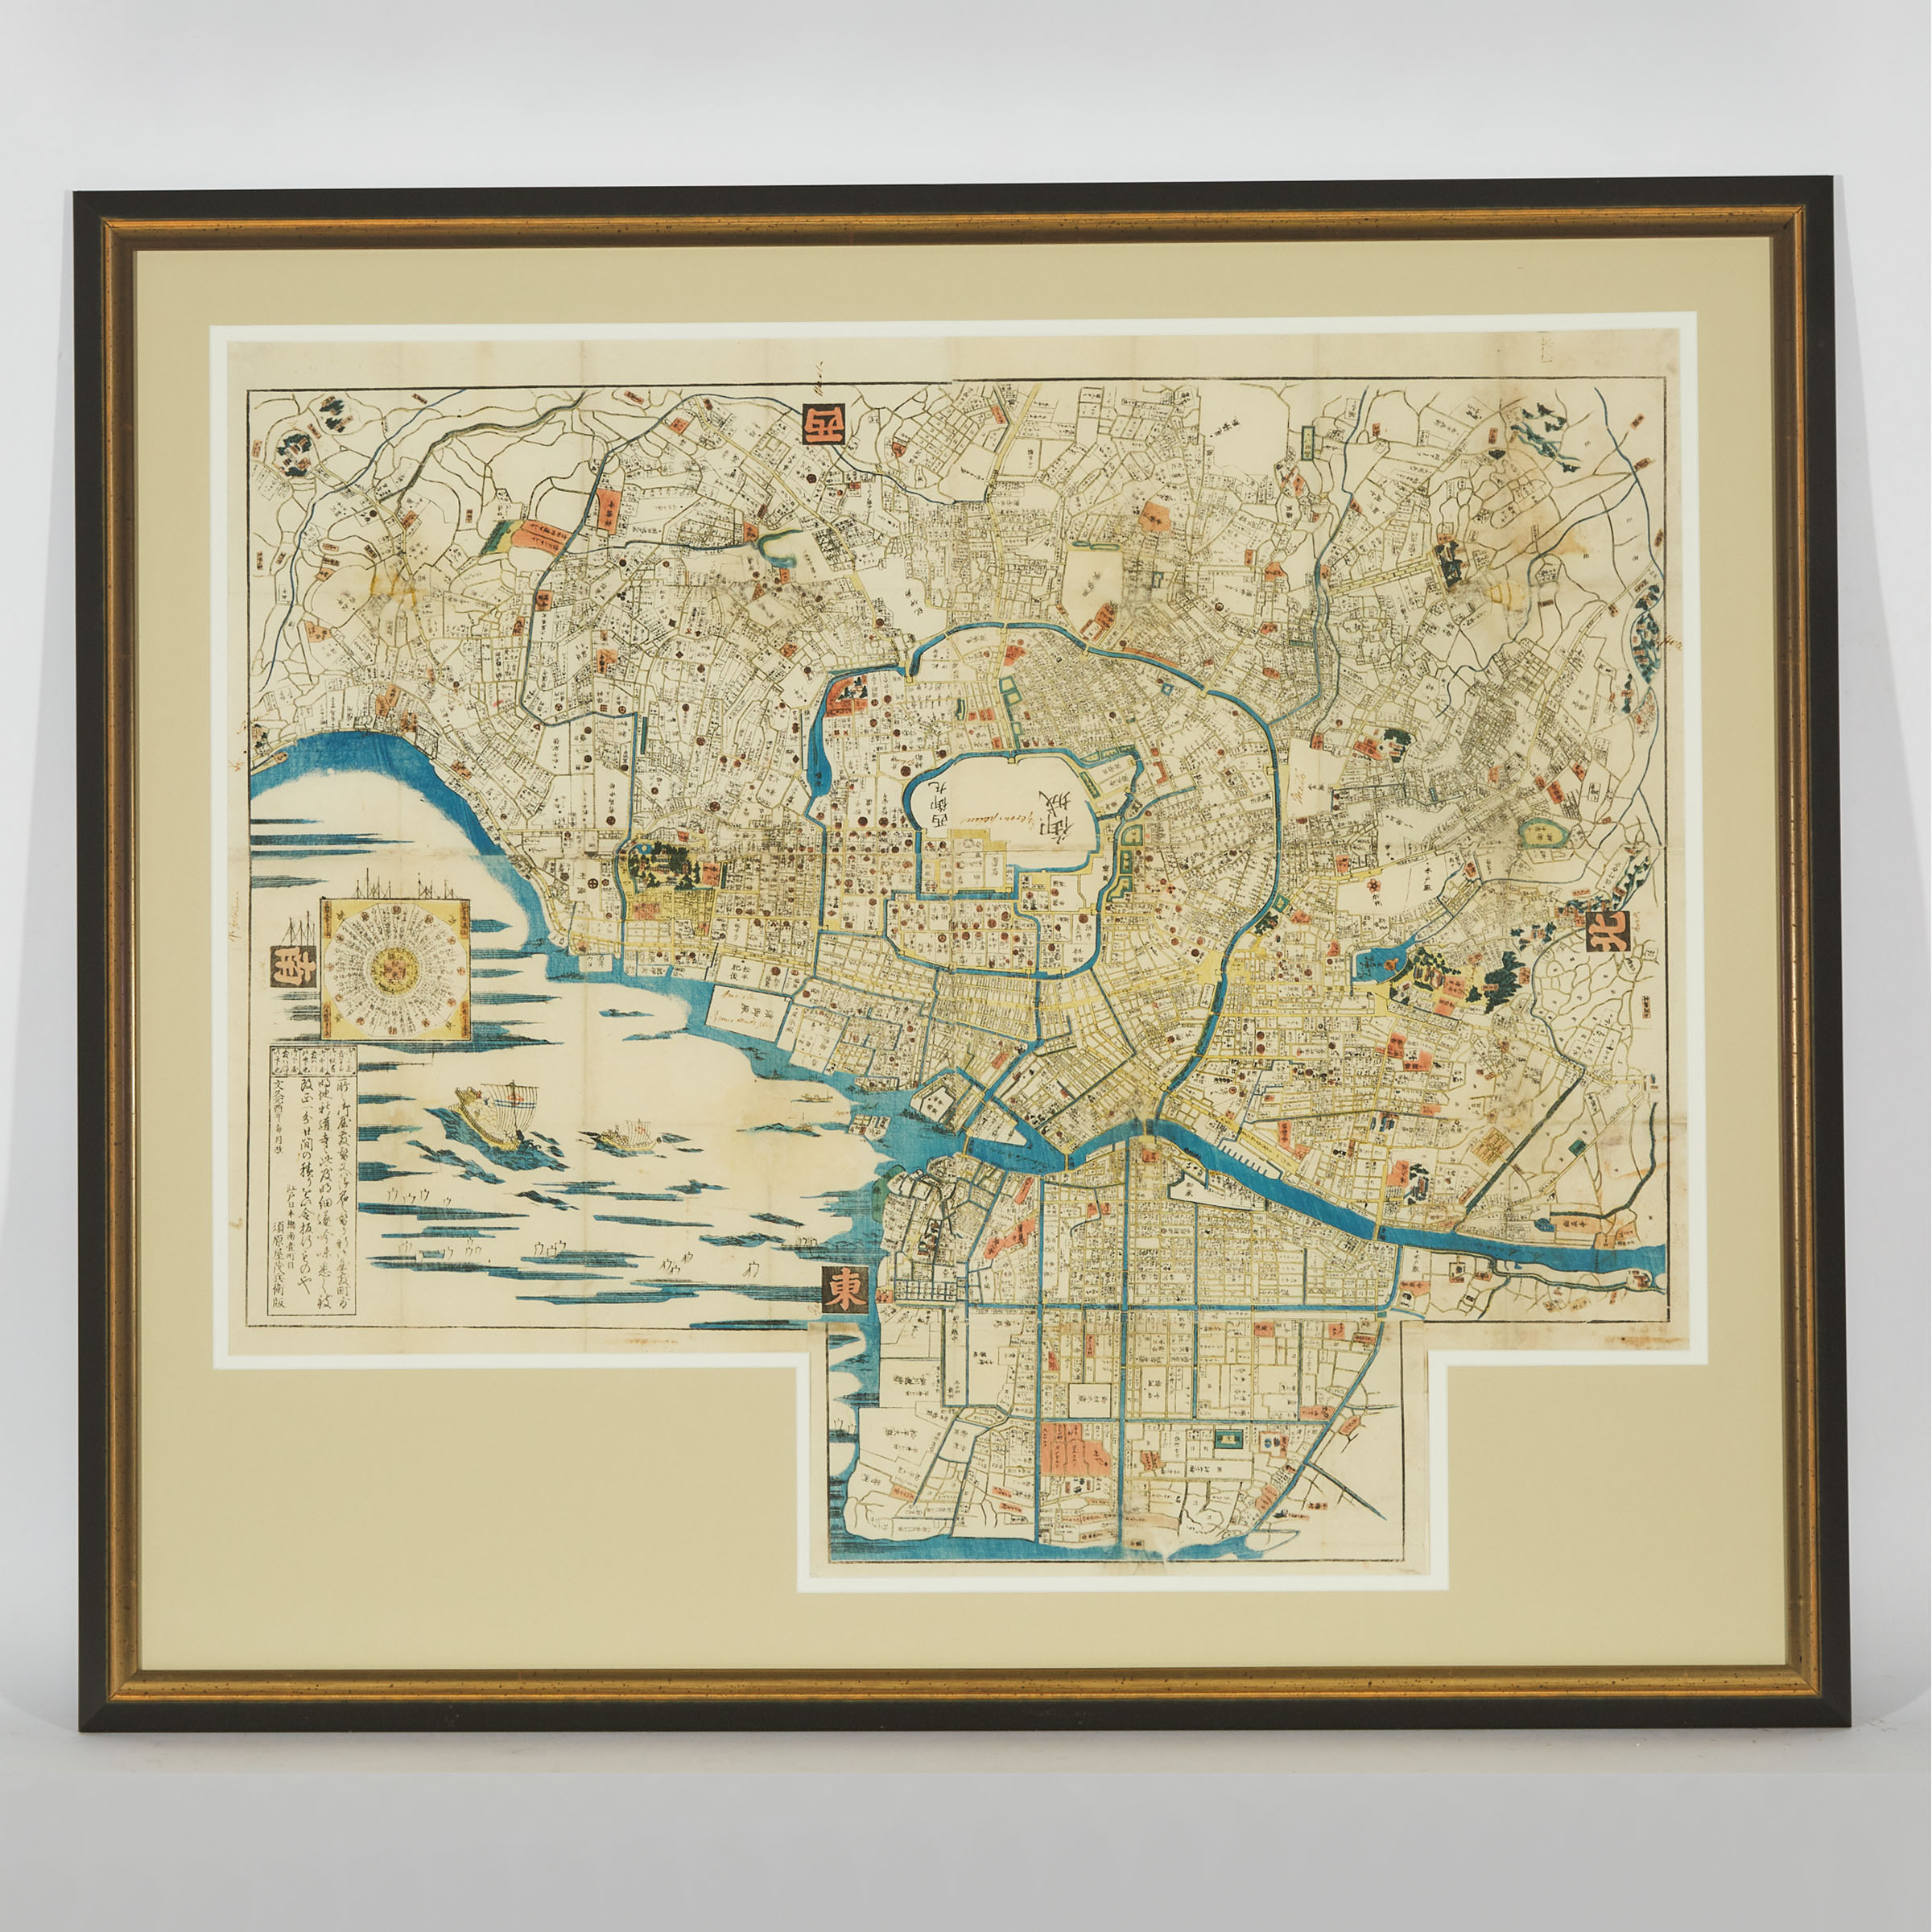 A Large-Scale Map of Edo (Tokyo),